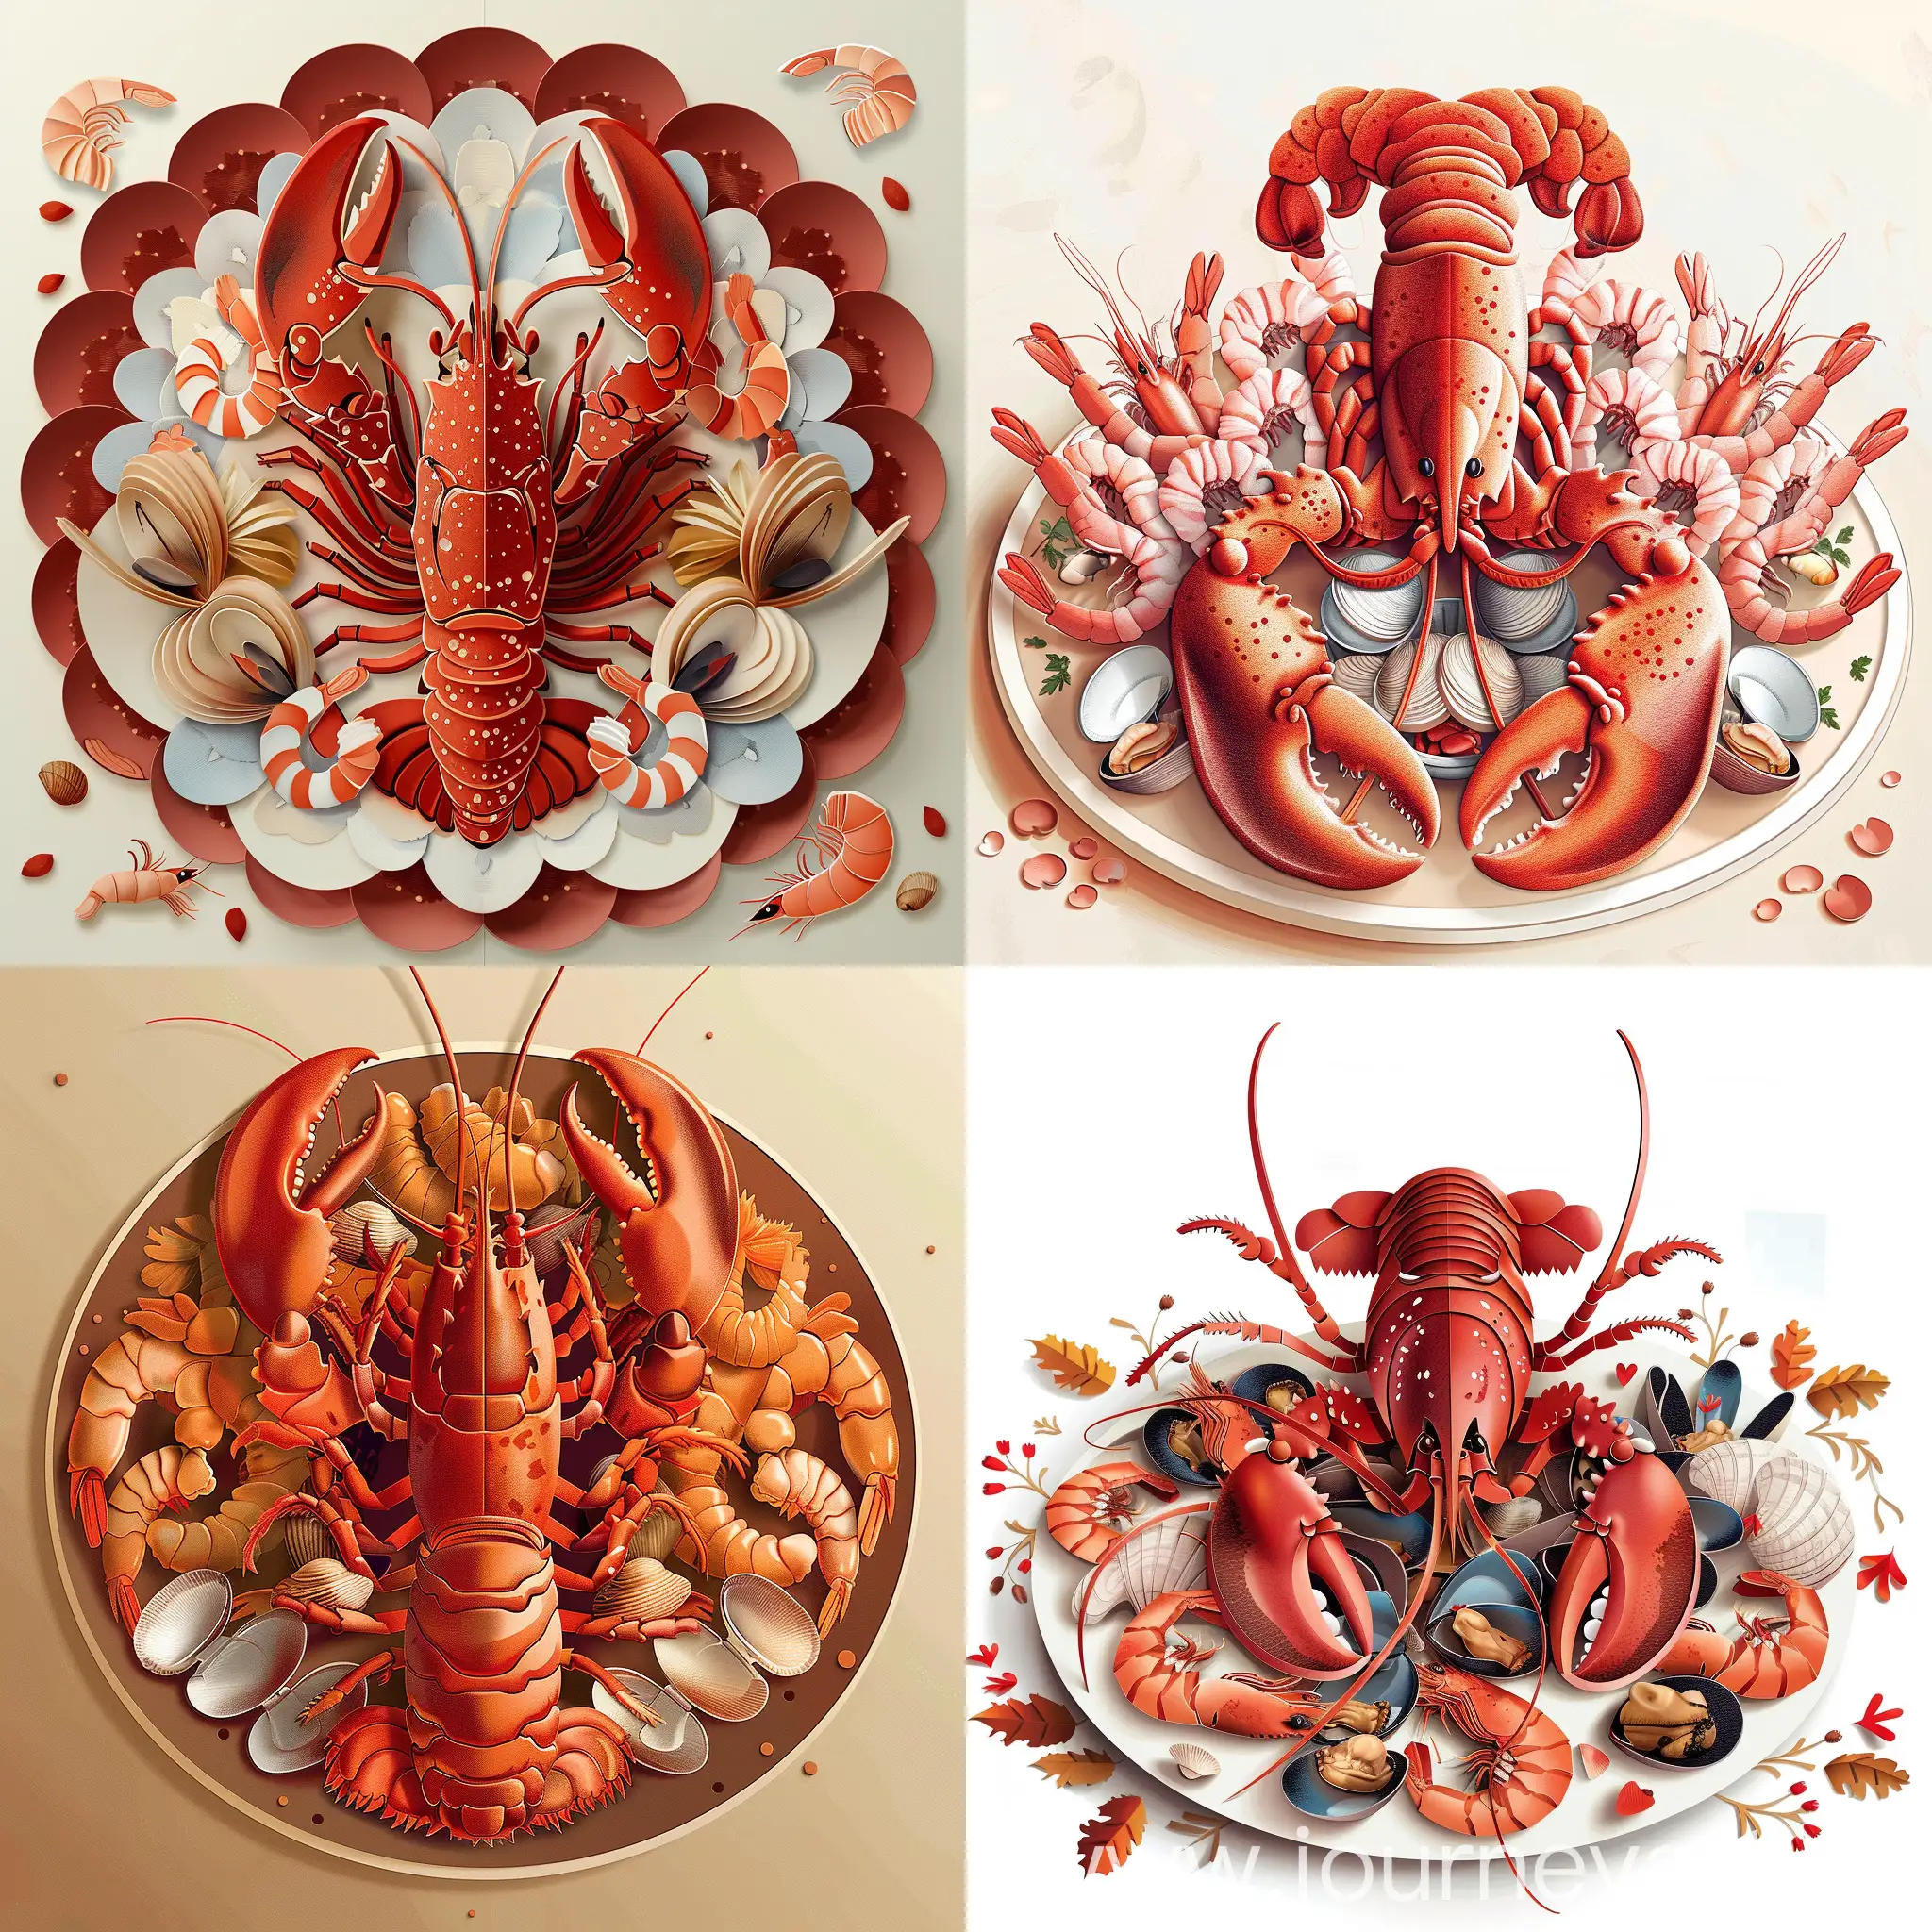 Exquisite-Cut-Paper-Seafood-Platter-Lobster-Shrimp-and-Clams-in-Detailed-Vector-Style